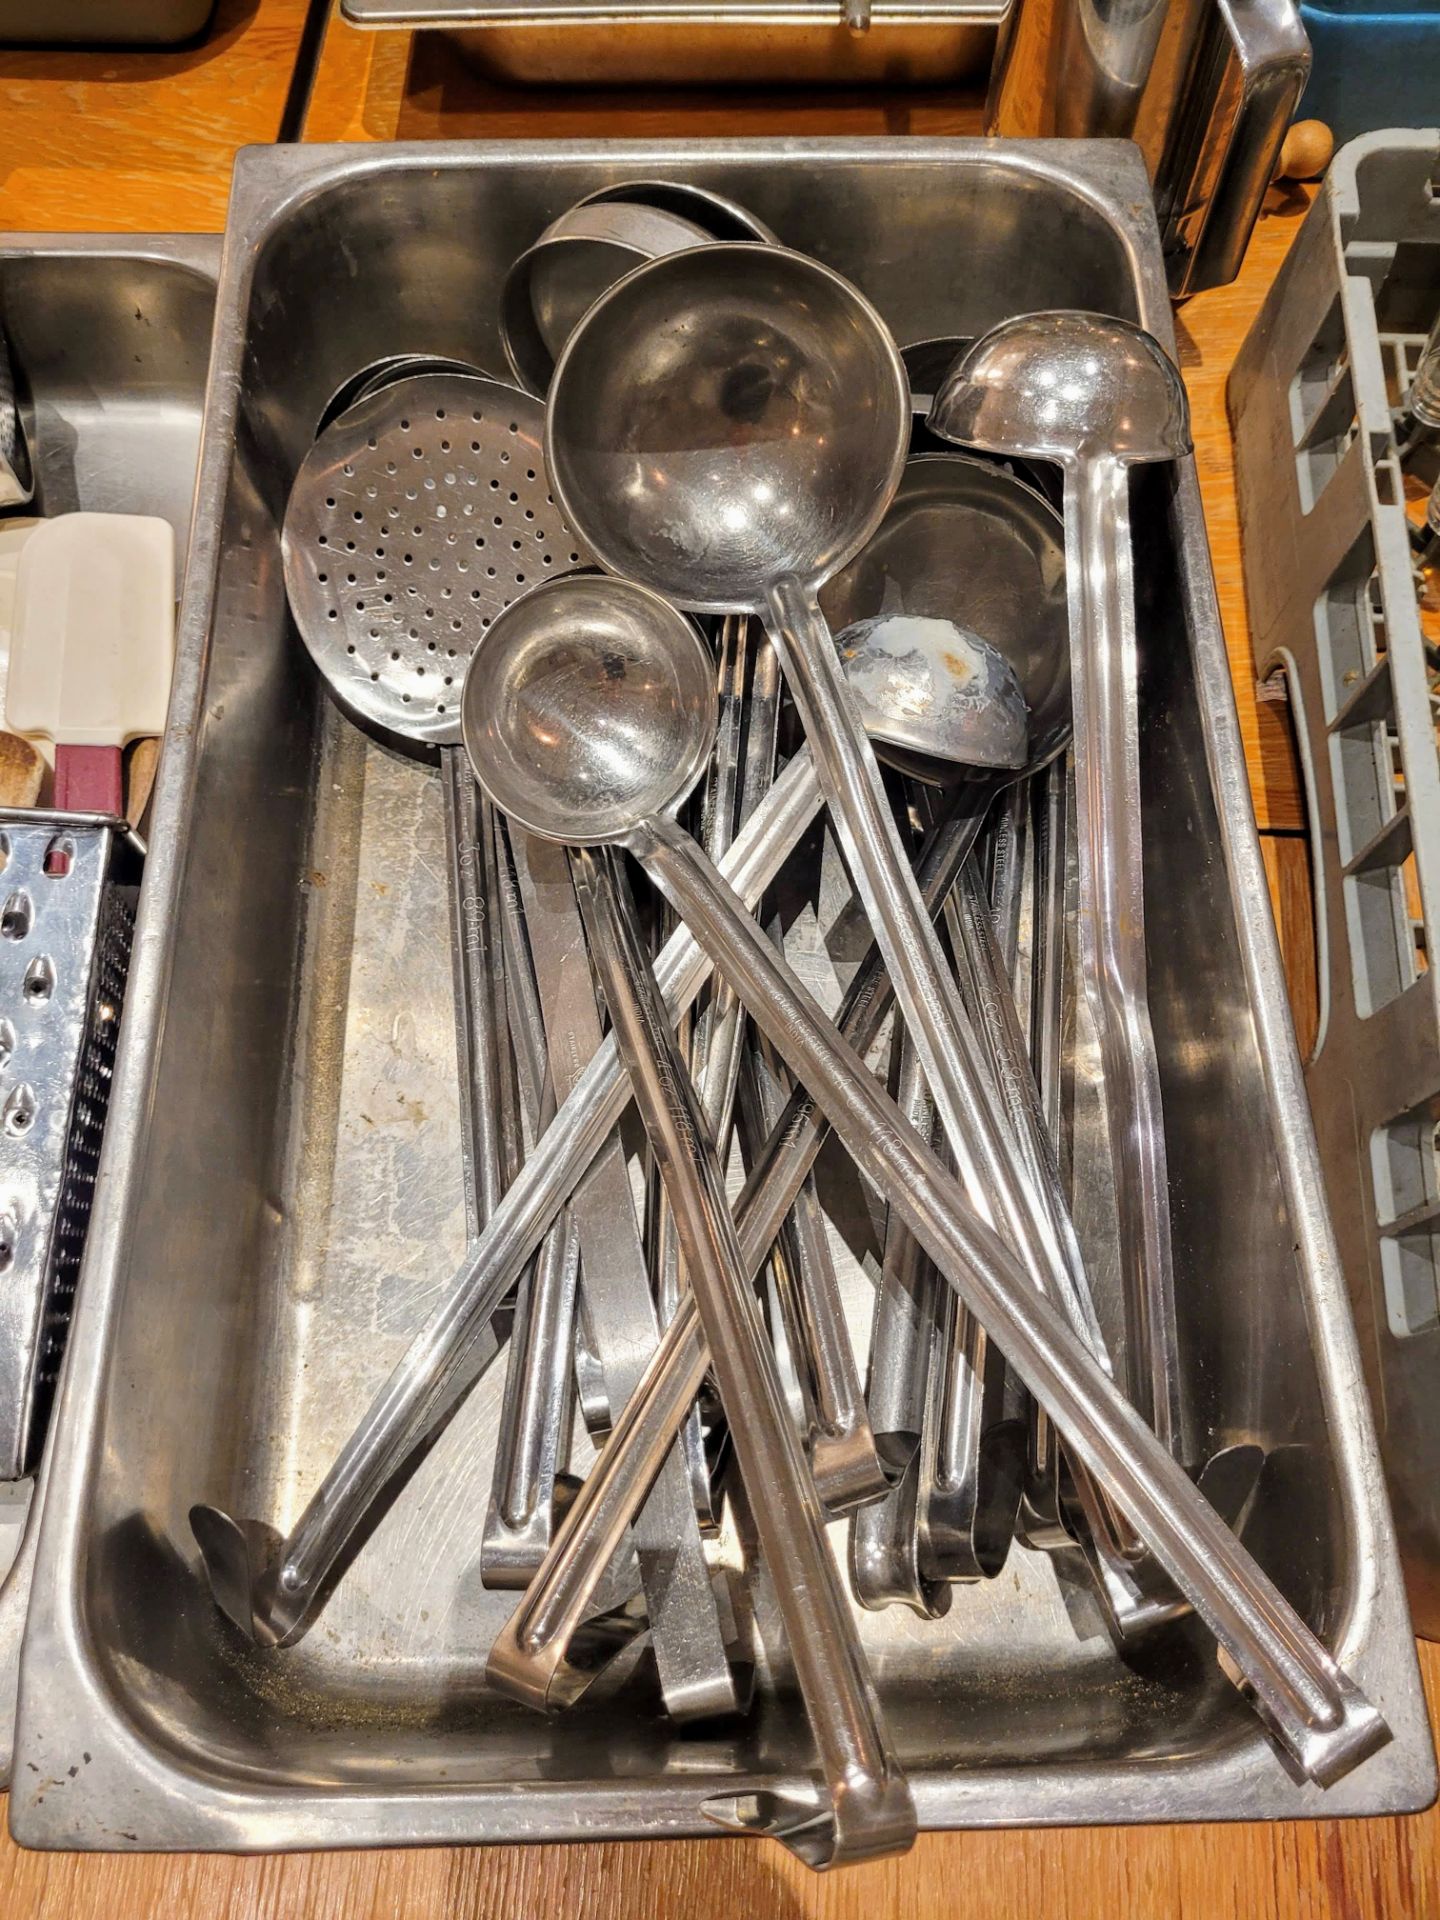 LOT - LARGE ASSORTMENT OF KITCHEN UNTENSILS: LADELS, TONGS, WHISKS, ROLLING PINS, WOODEN SPOONS, - Image 6 of 15